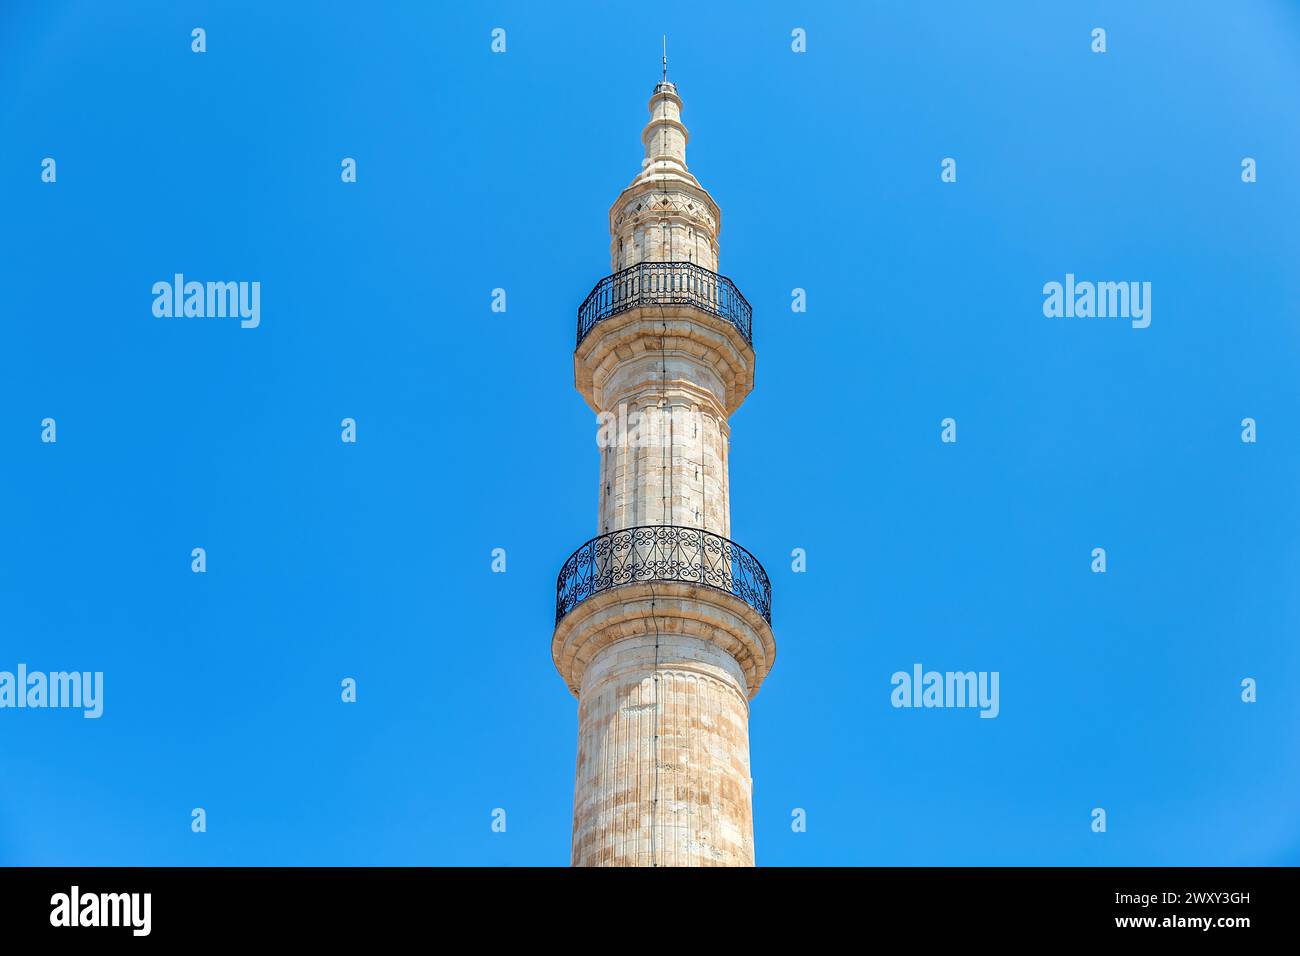 Neratze Mosque iconic Minaret tower at Rethymno city, Crete island, Greece. Under view, upper part of Islamic monument on blue sky background. Stock Photo